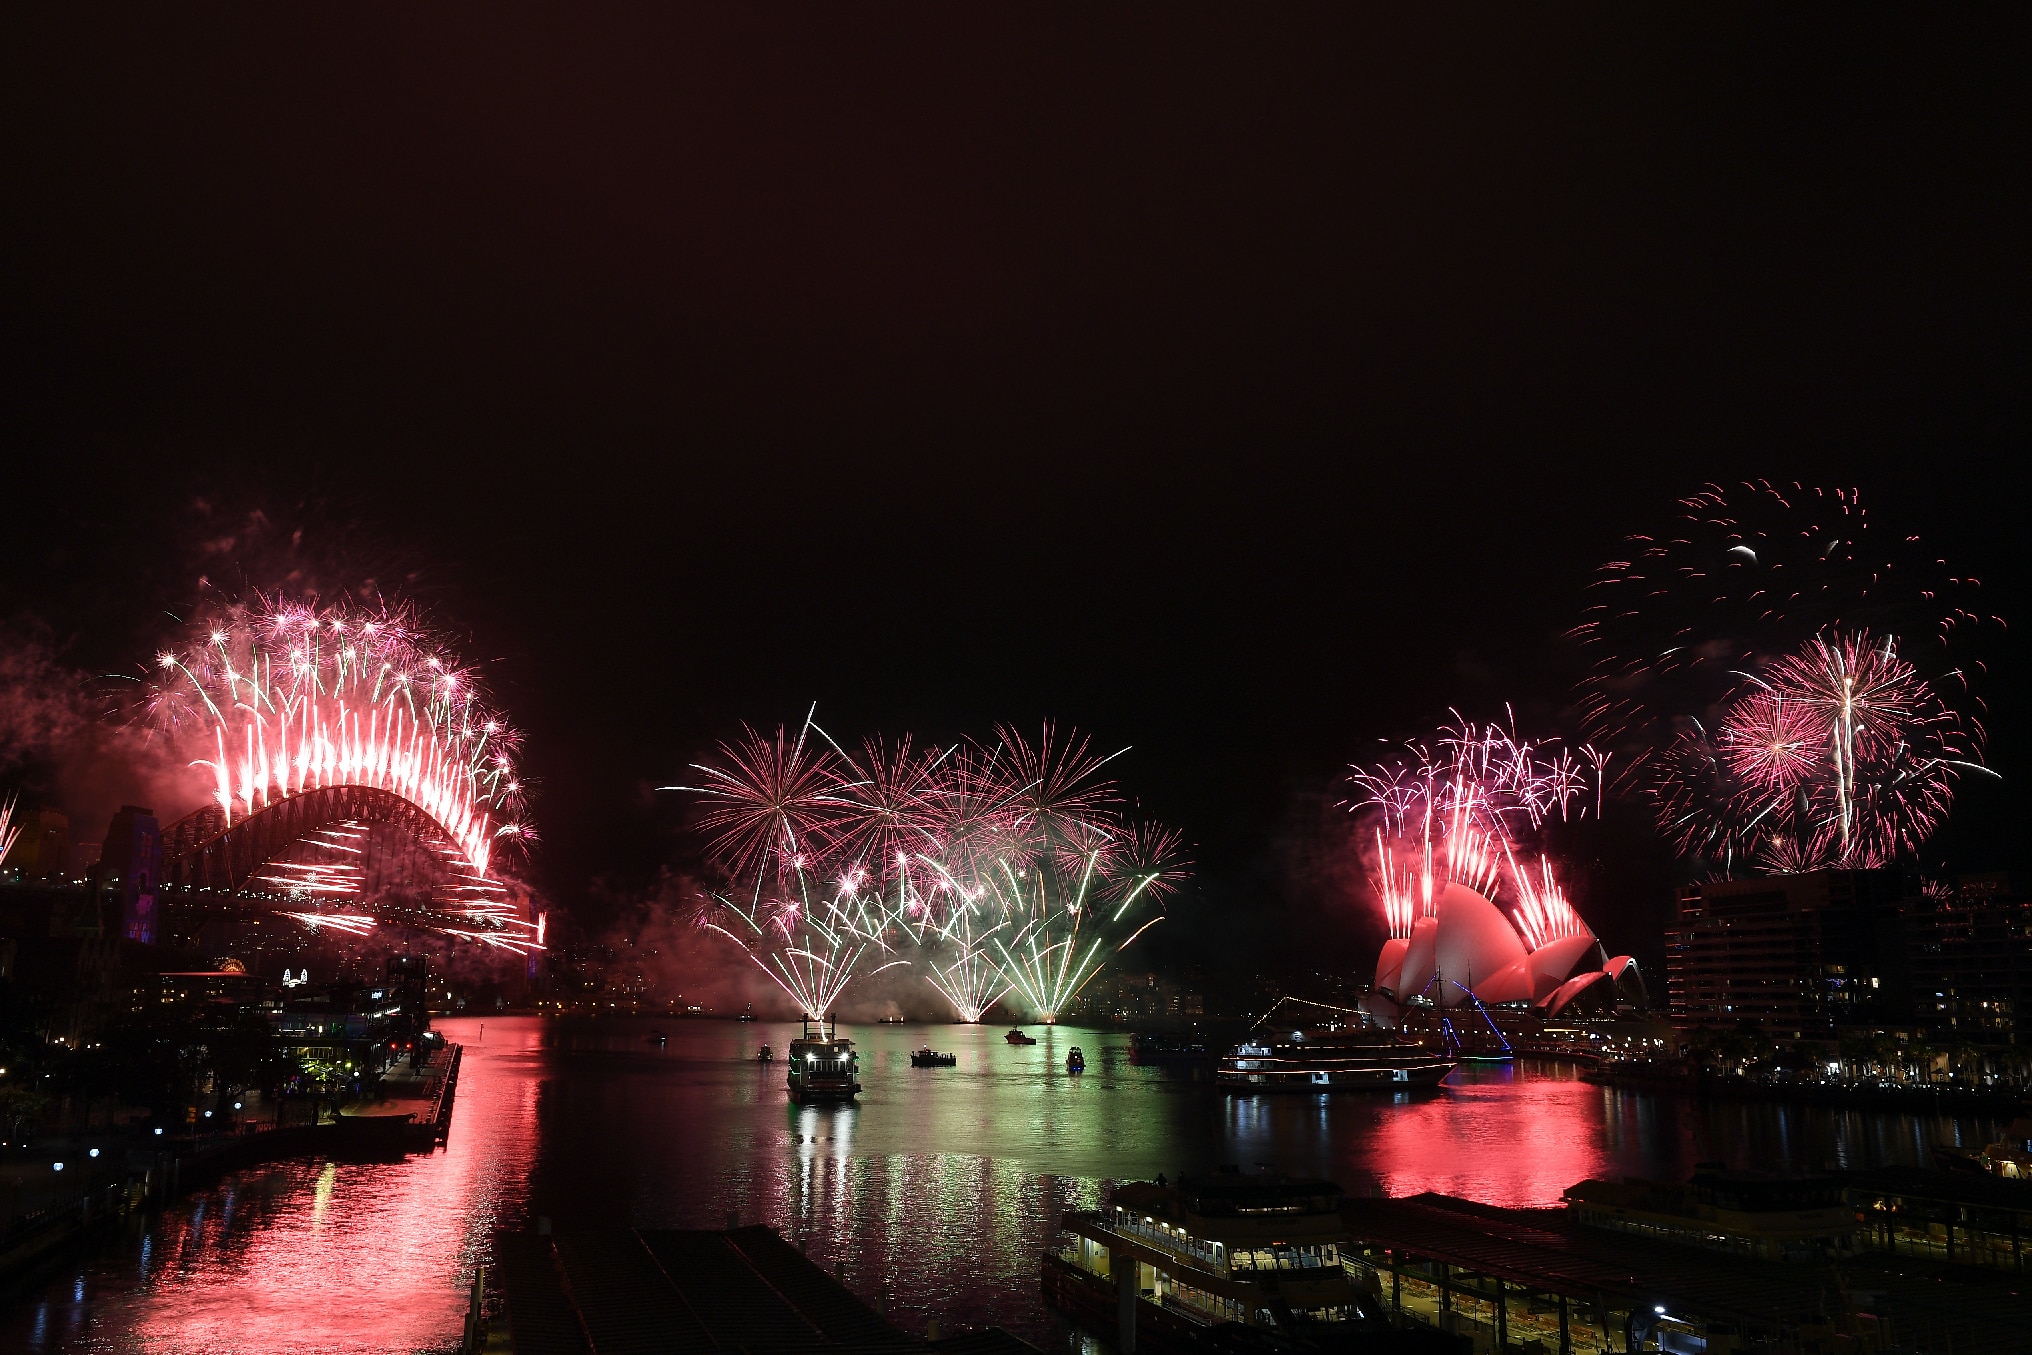 Sydneysiders were asked to stay home and watch the fireworks on television this year due to the COVID-19 pandemic.